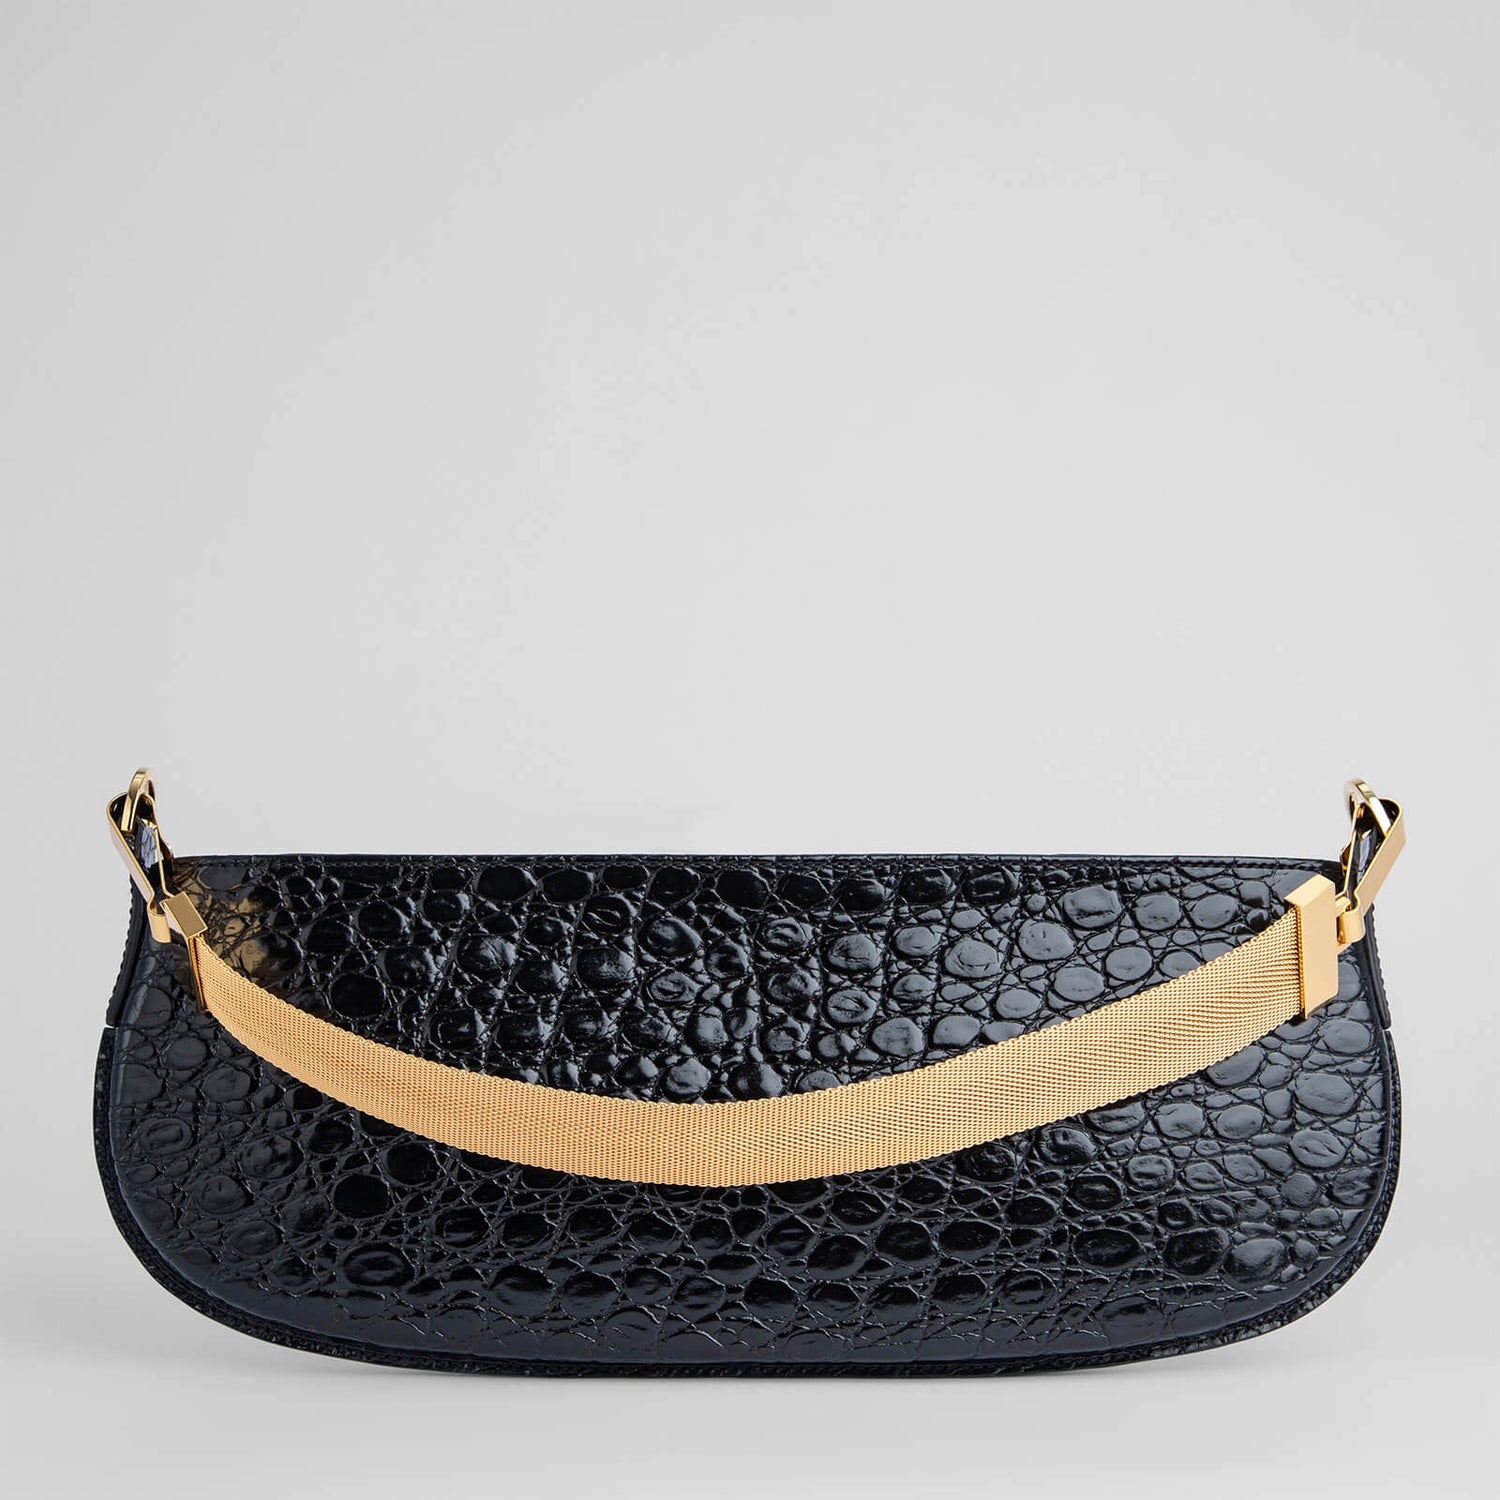 BY FAR Women's Beverly Croco Leather Bag - Black